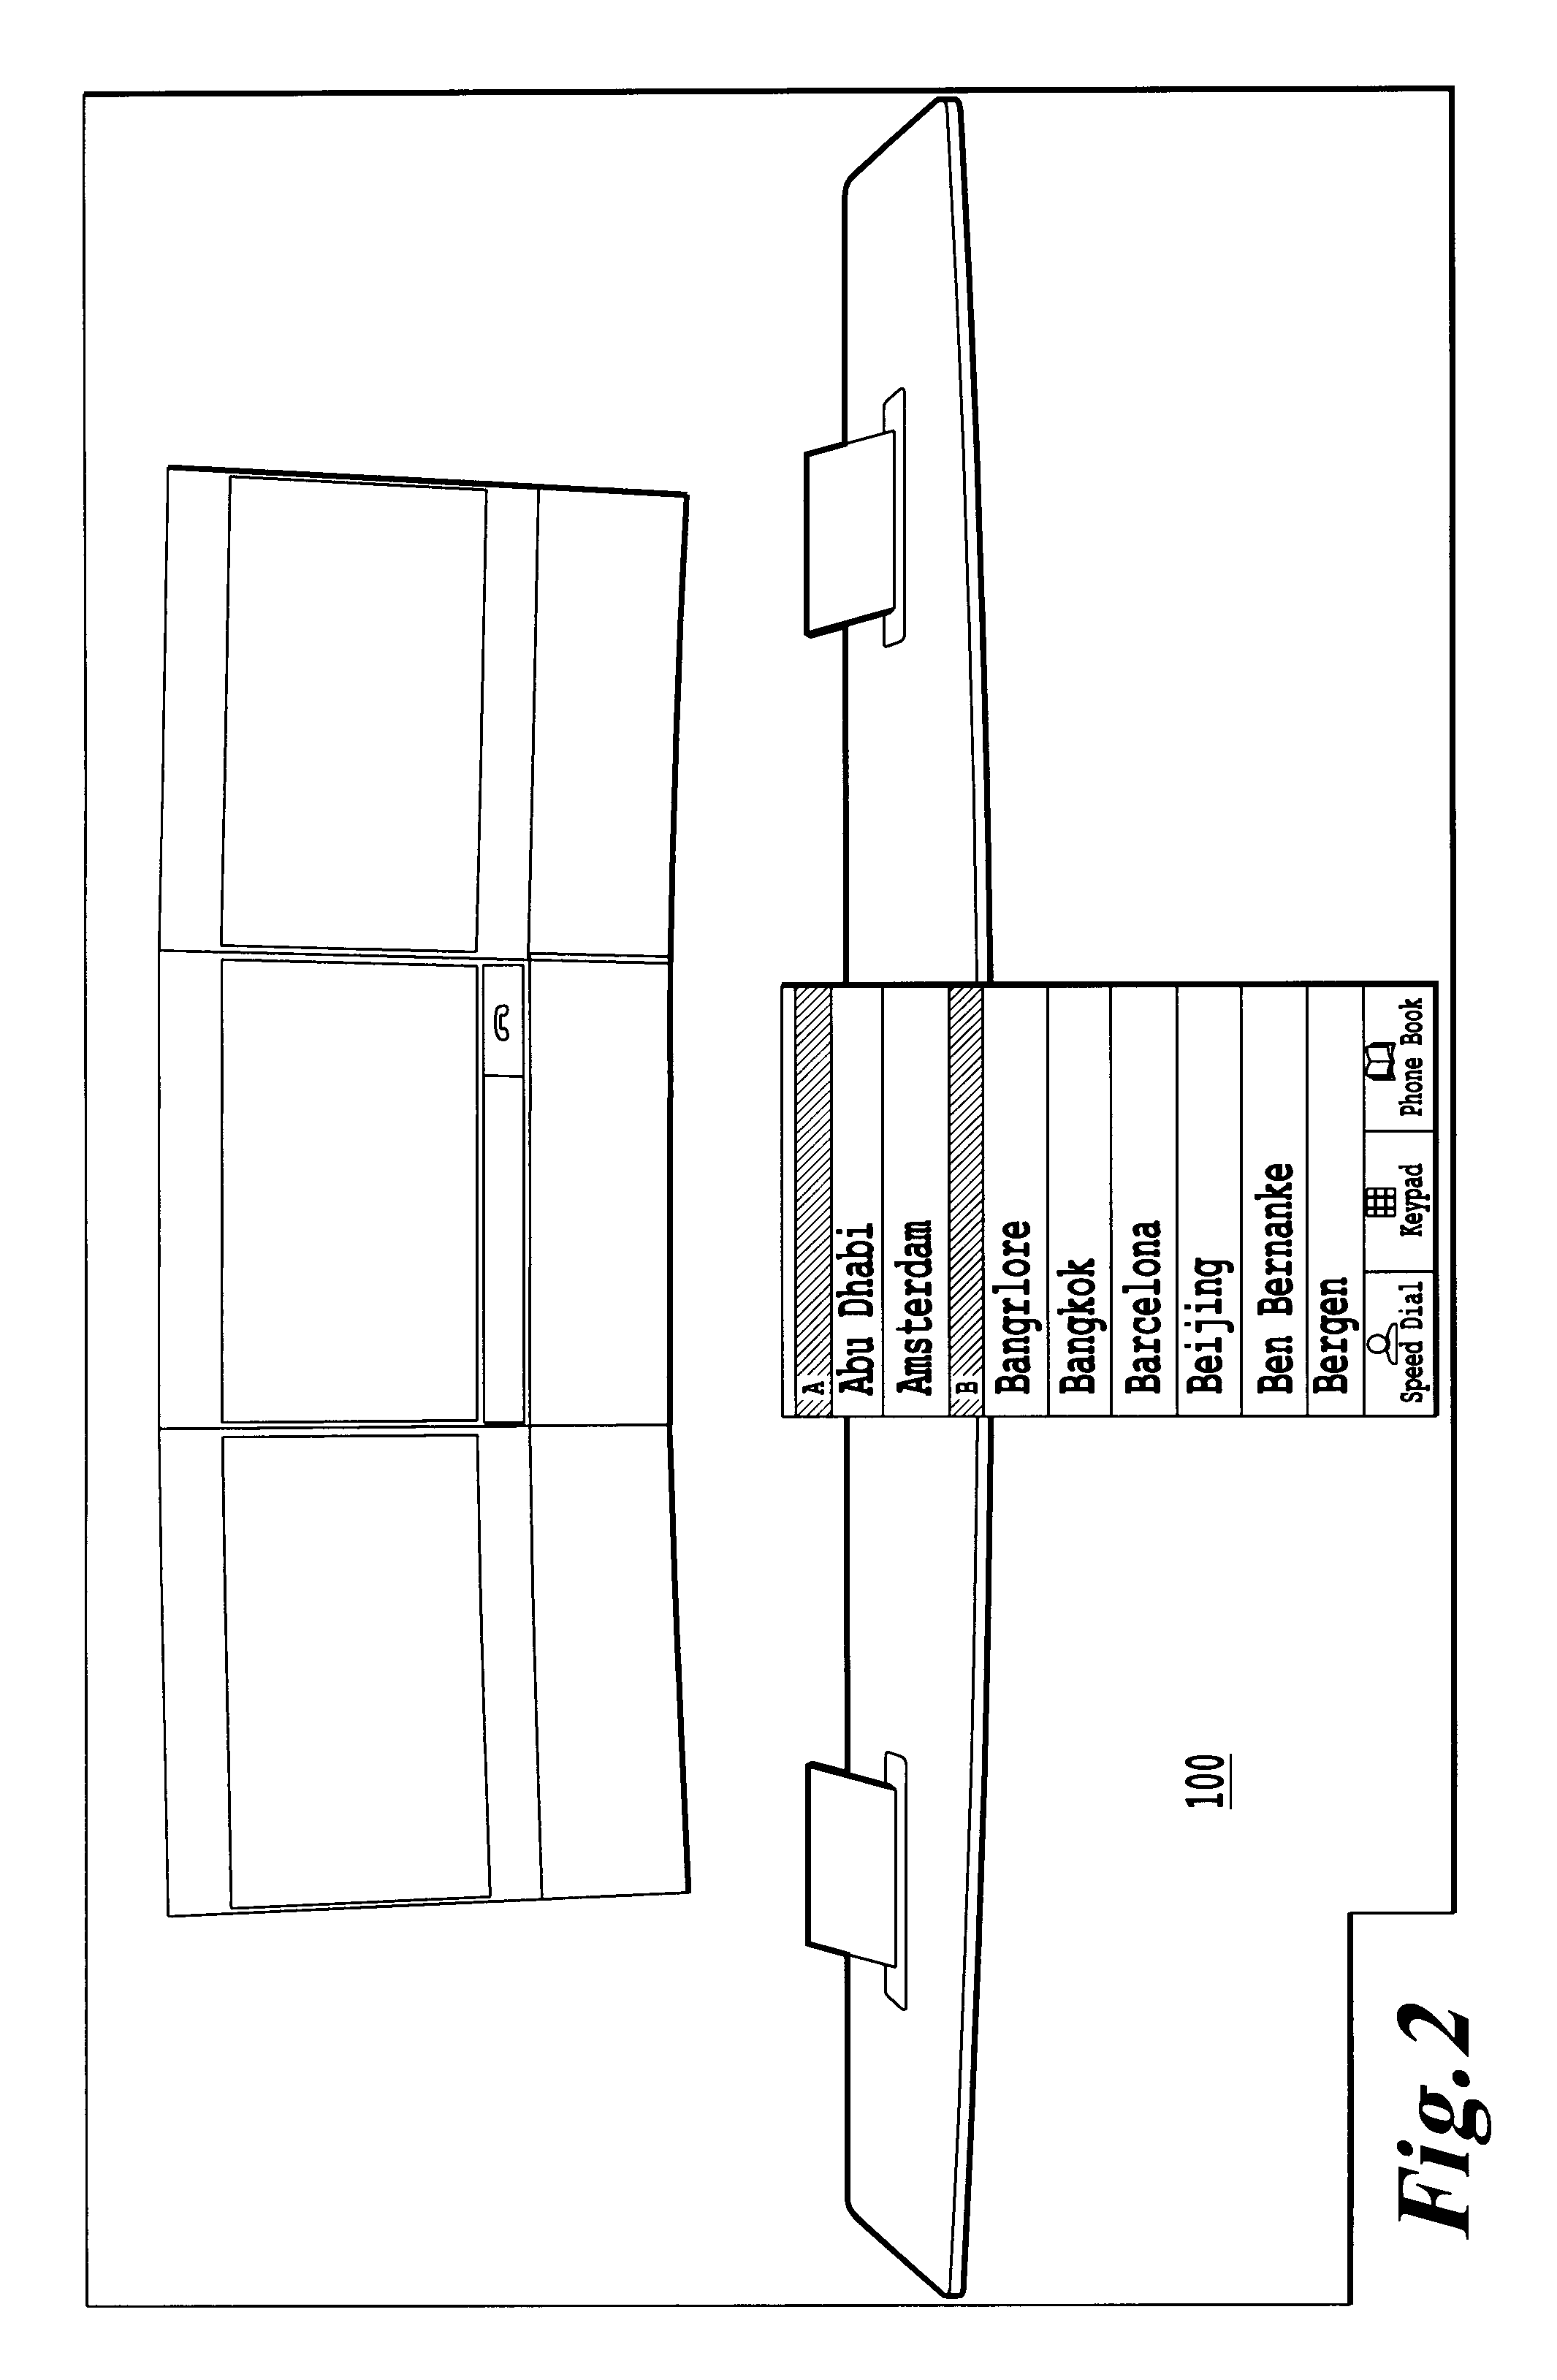 Computer-processor based interface for telepresence system, method and computer program product